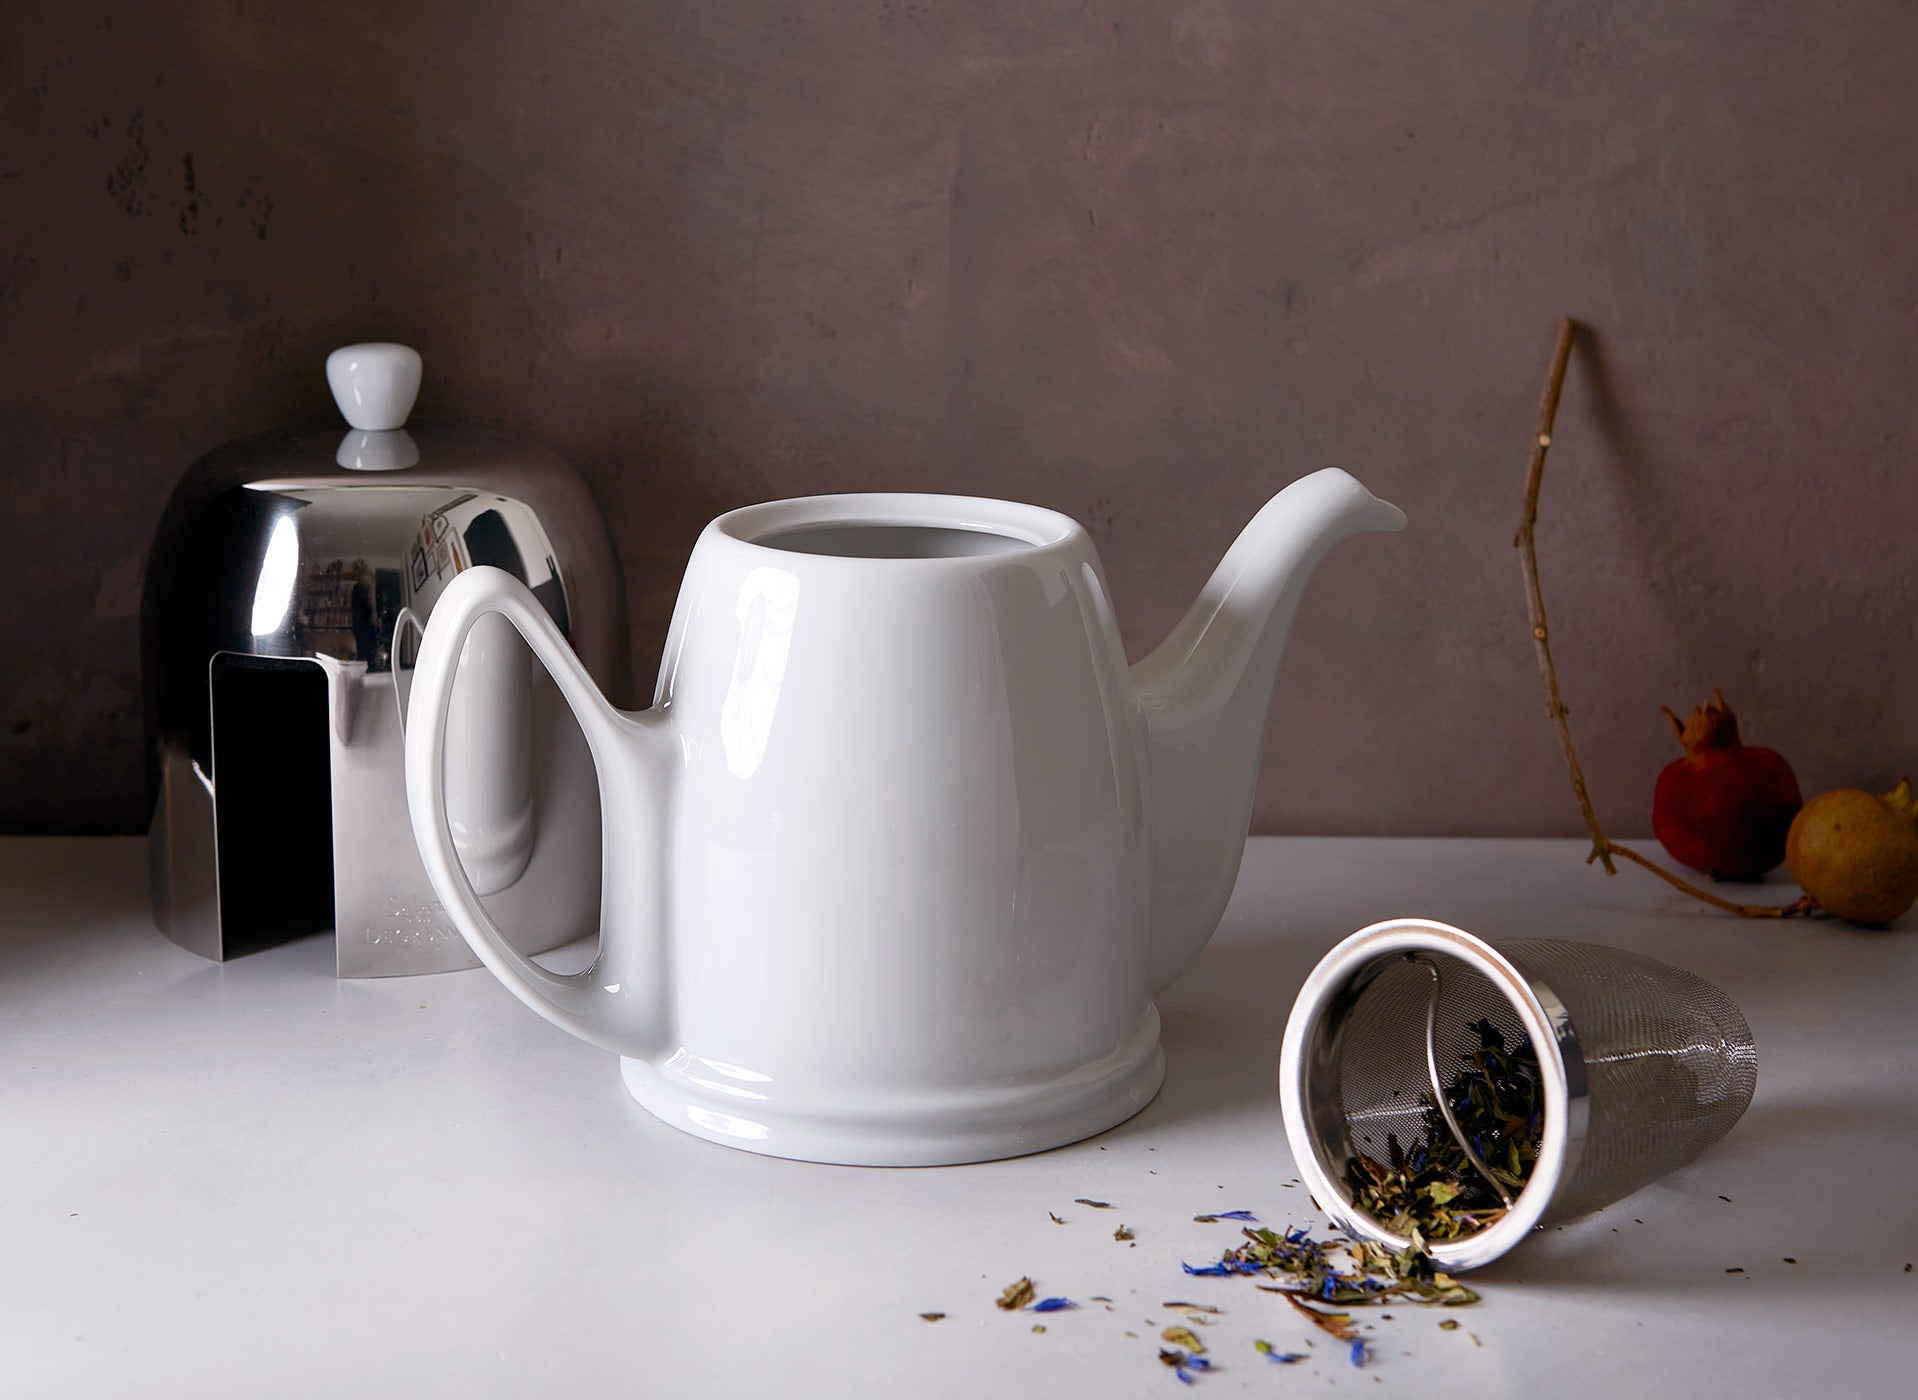 Degrenne Salam Insulated Teapot by Food52 - Dwell